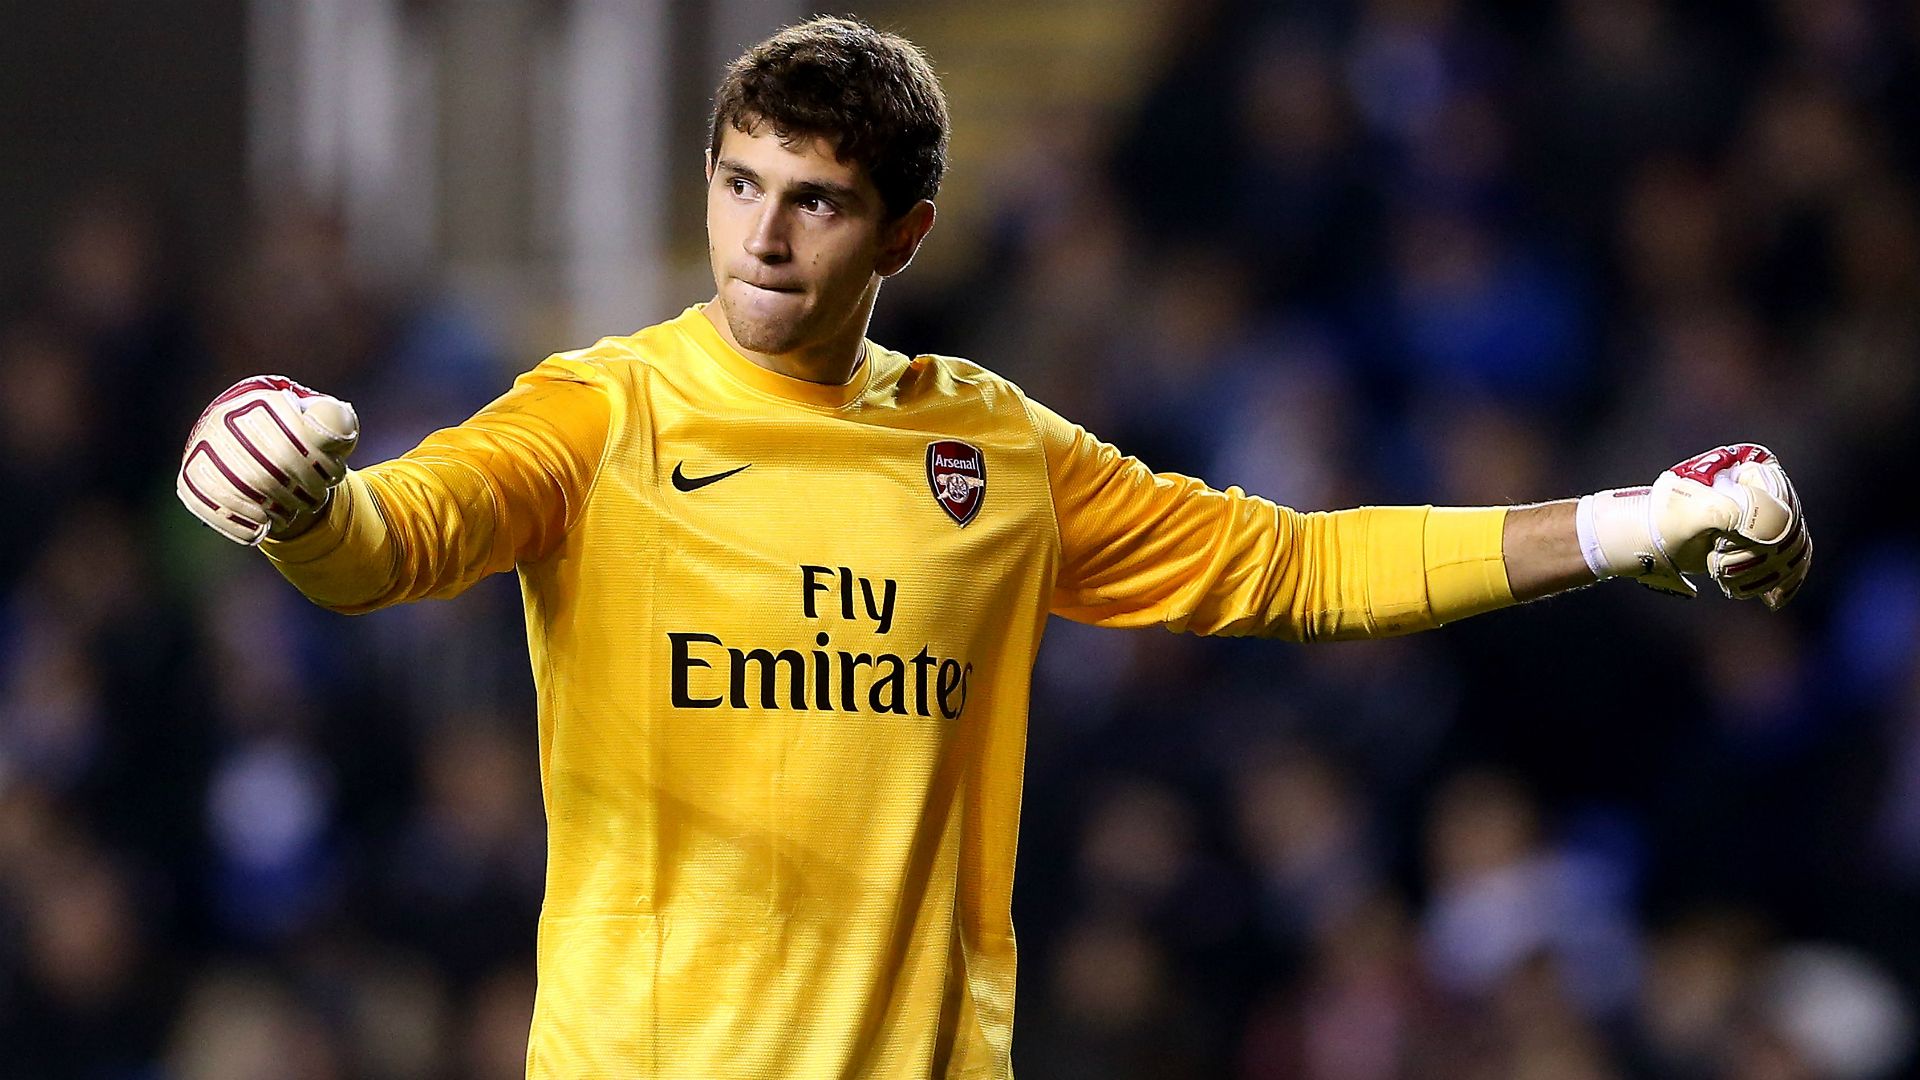 Emiliano Martinez signs new Arsenal deal